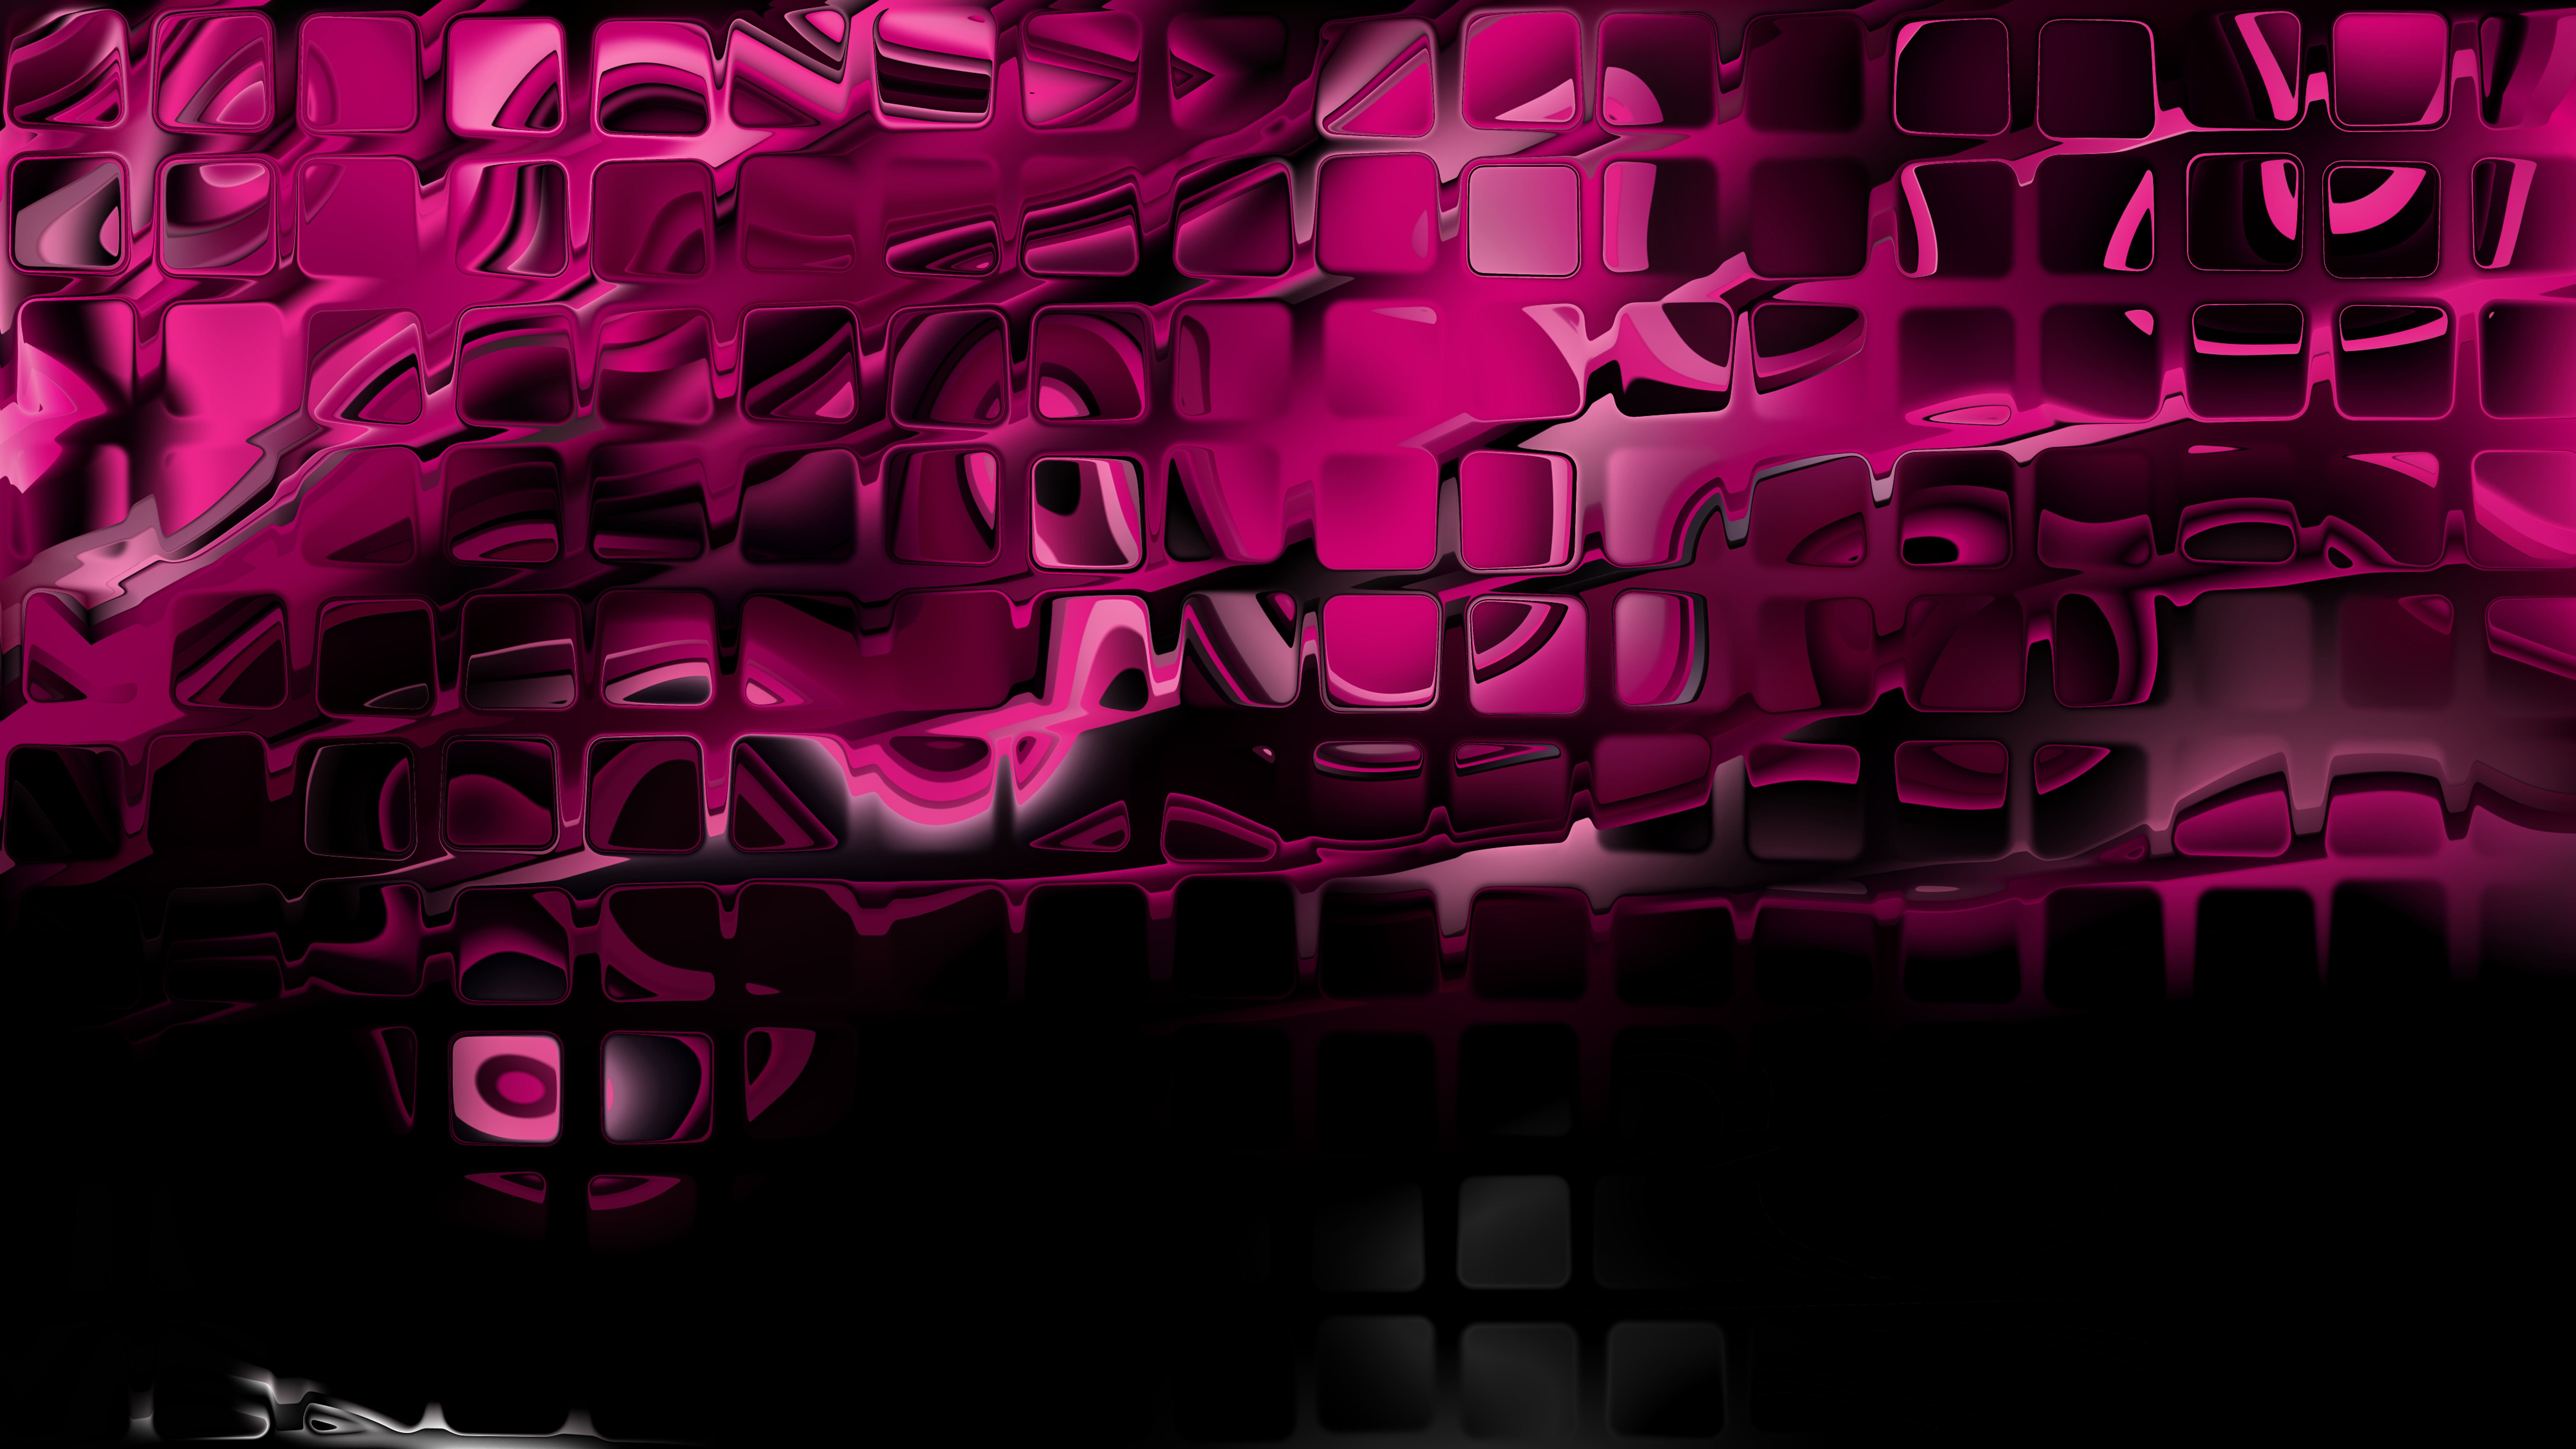 Free Abstract Pink and Black Texture Background Image